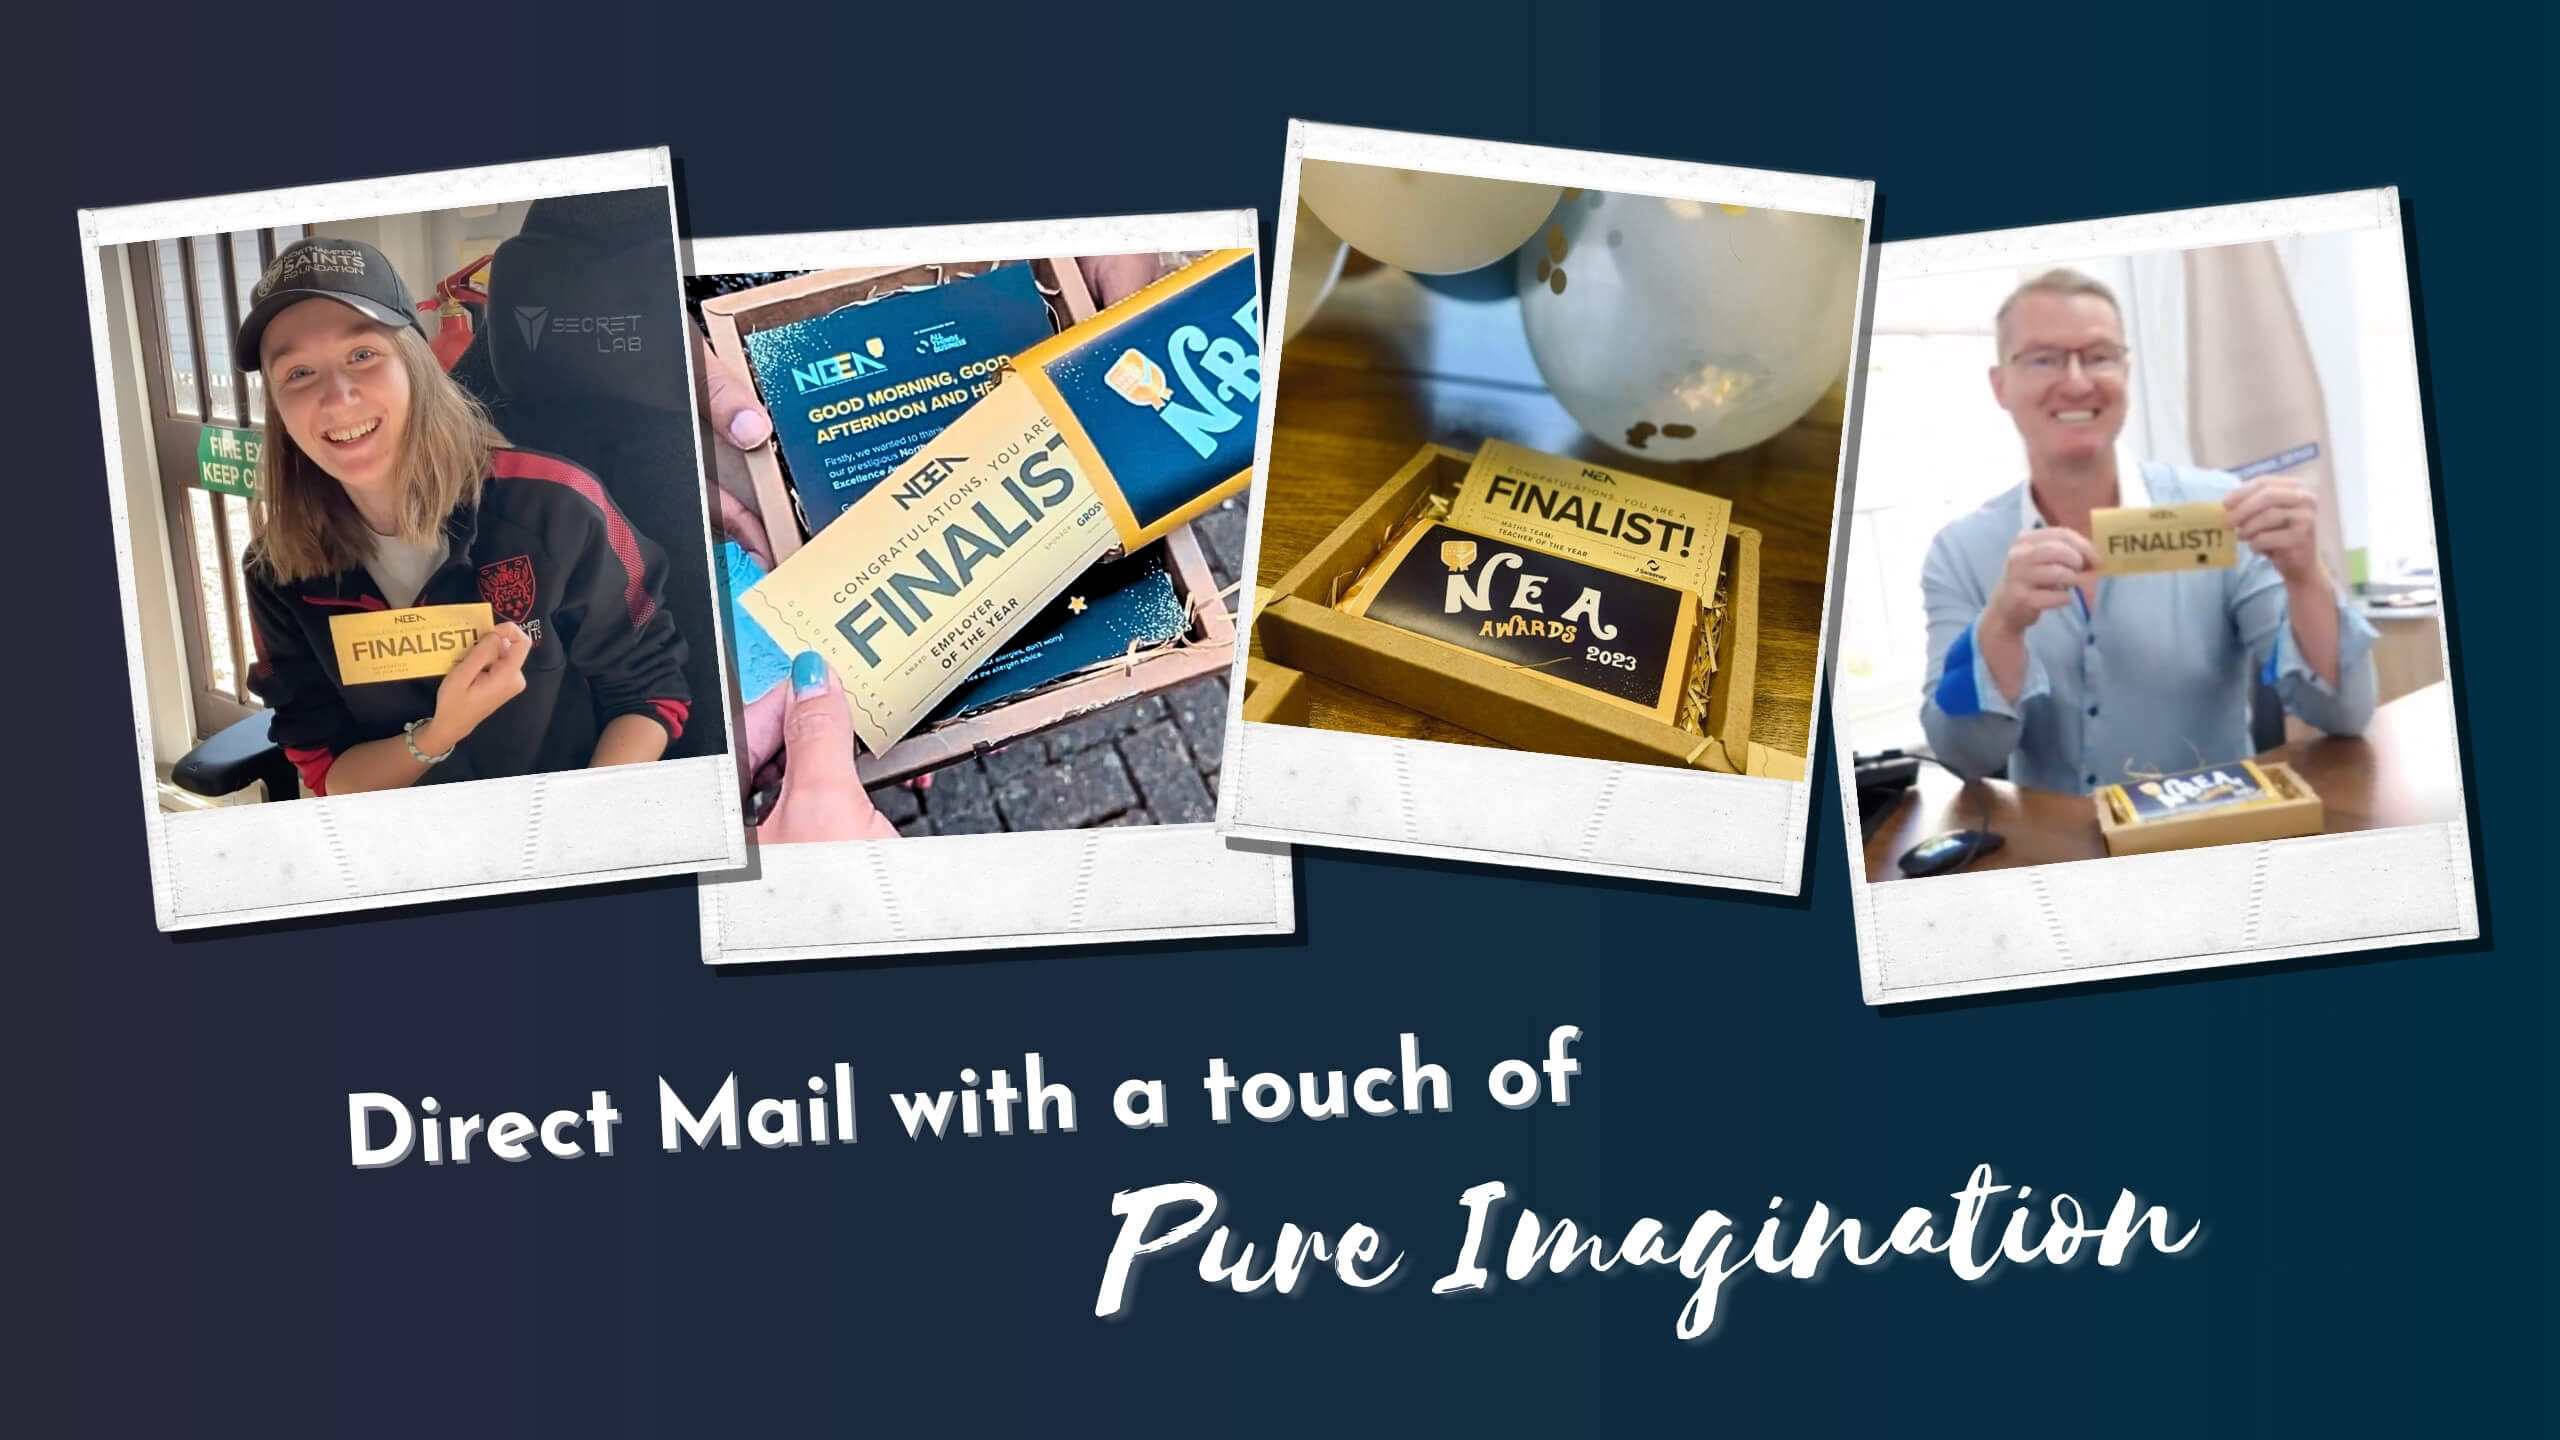 Direct Mail with Pure Imagination: Finalist Awards Announcement Success